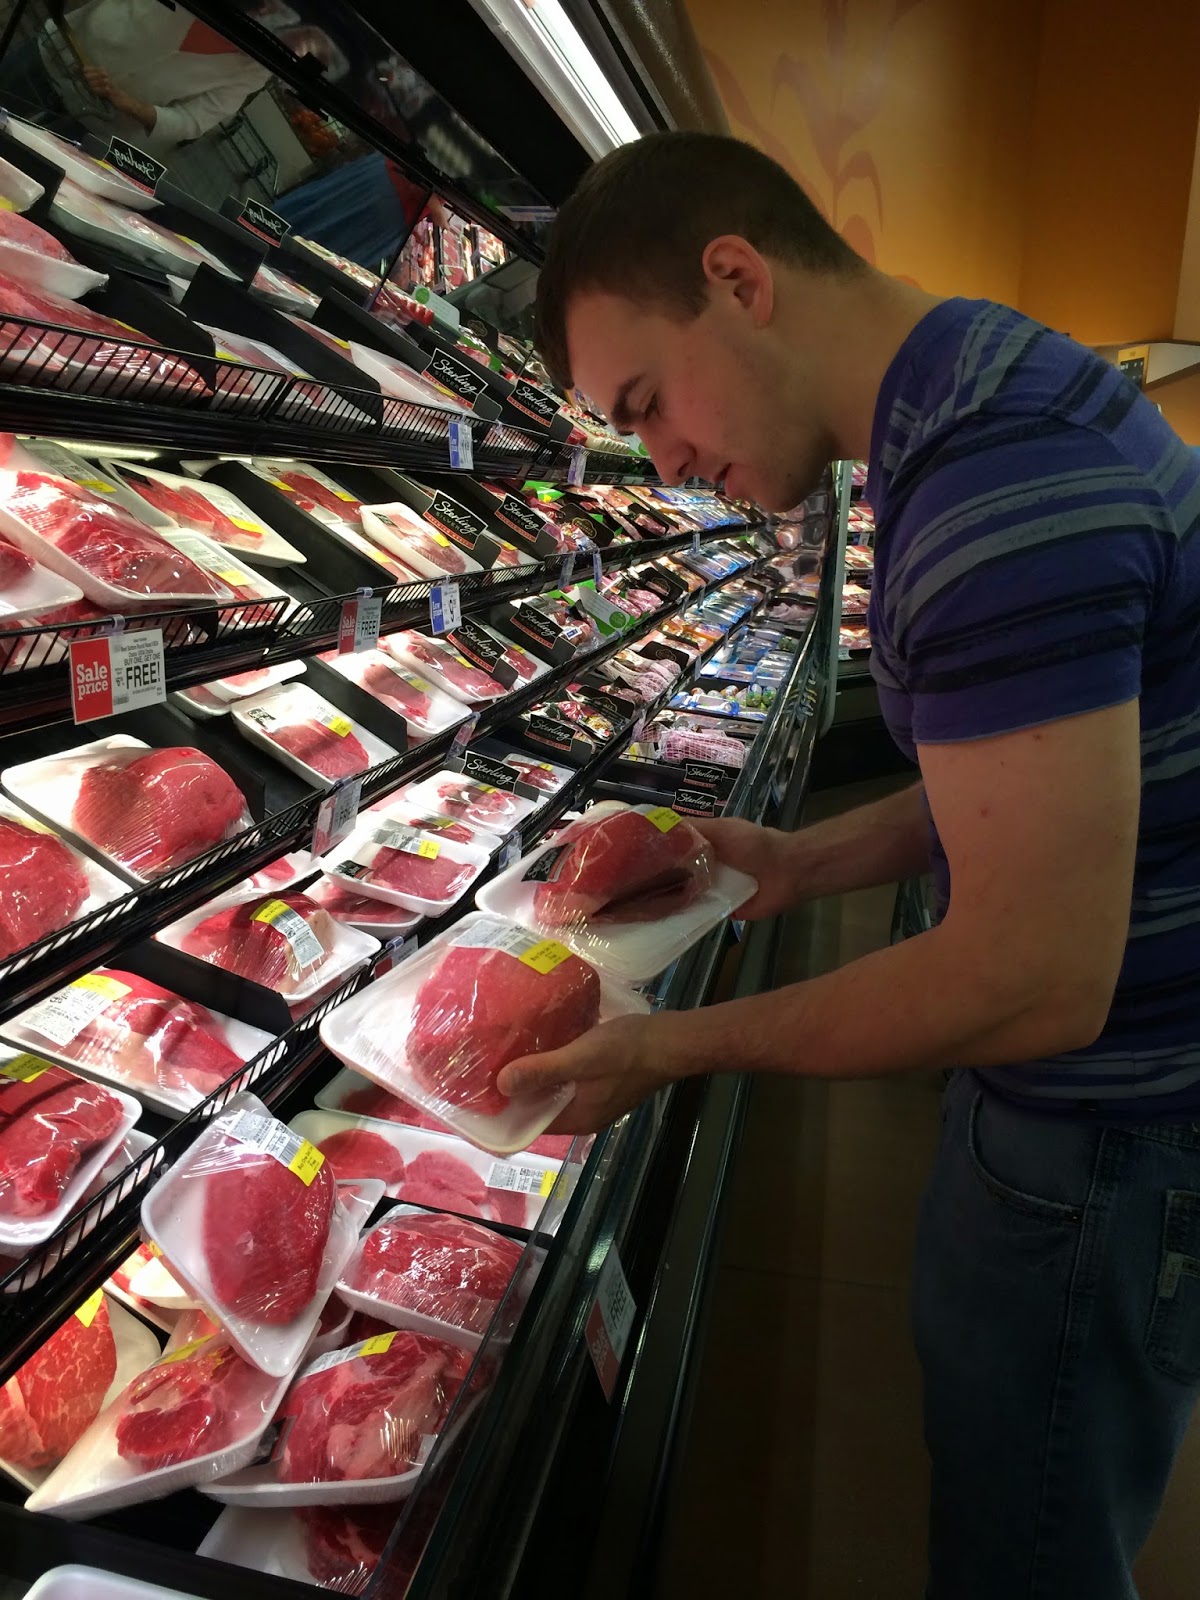 Shopping For Meat On A Budget